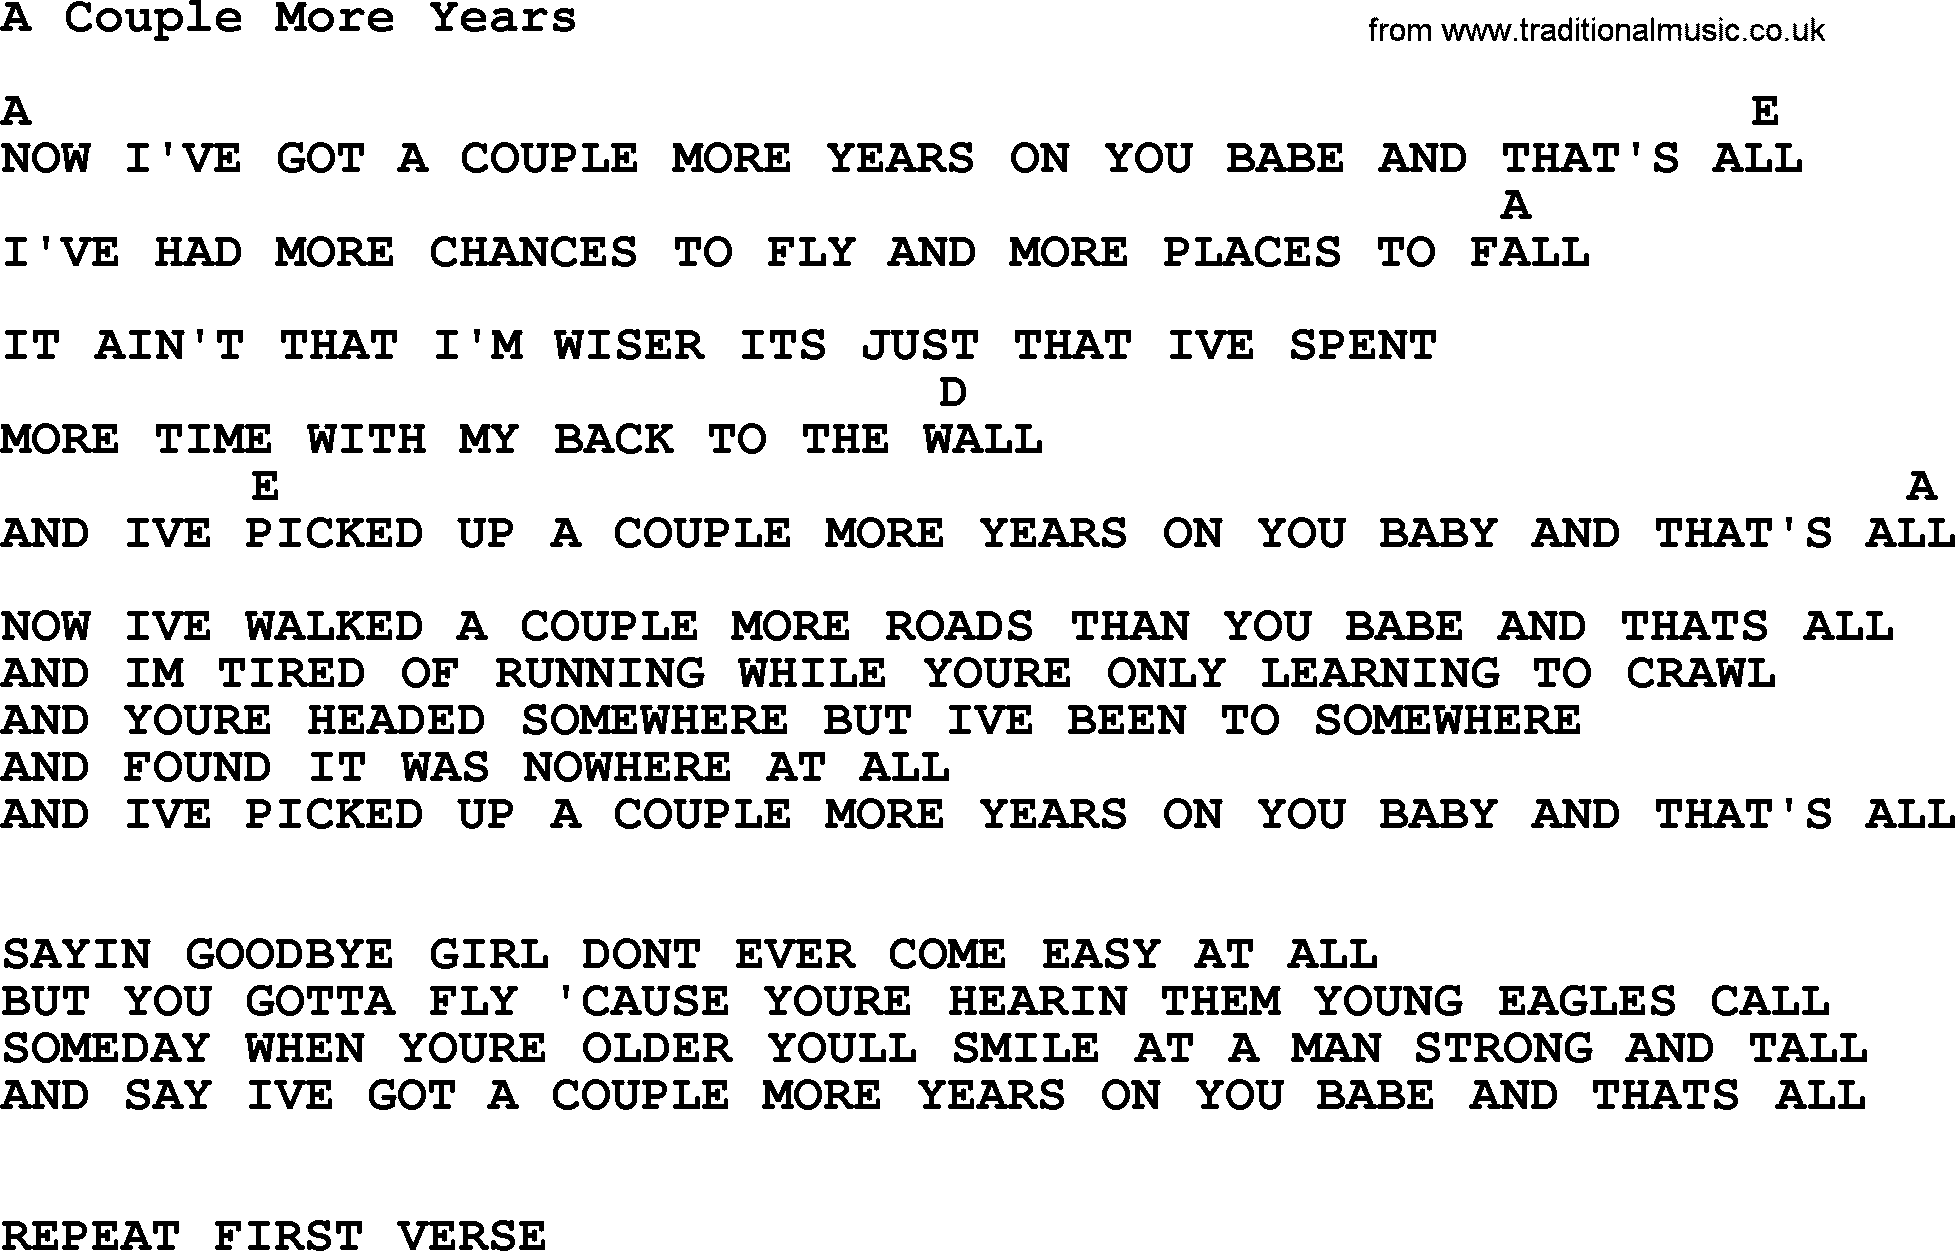 Willie Nelson song: A Couple More Years, lyrics and chords